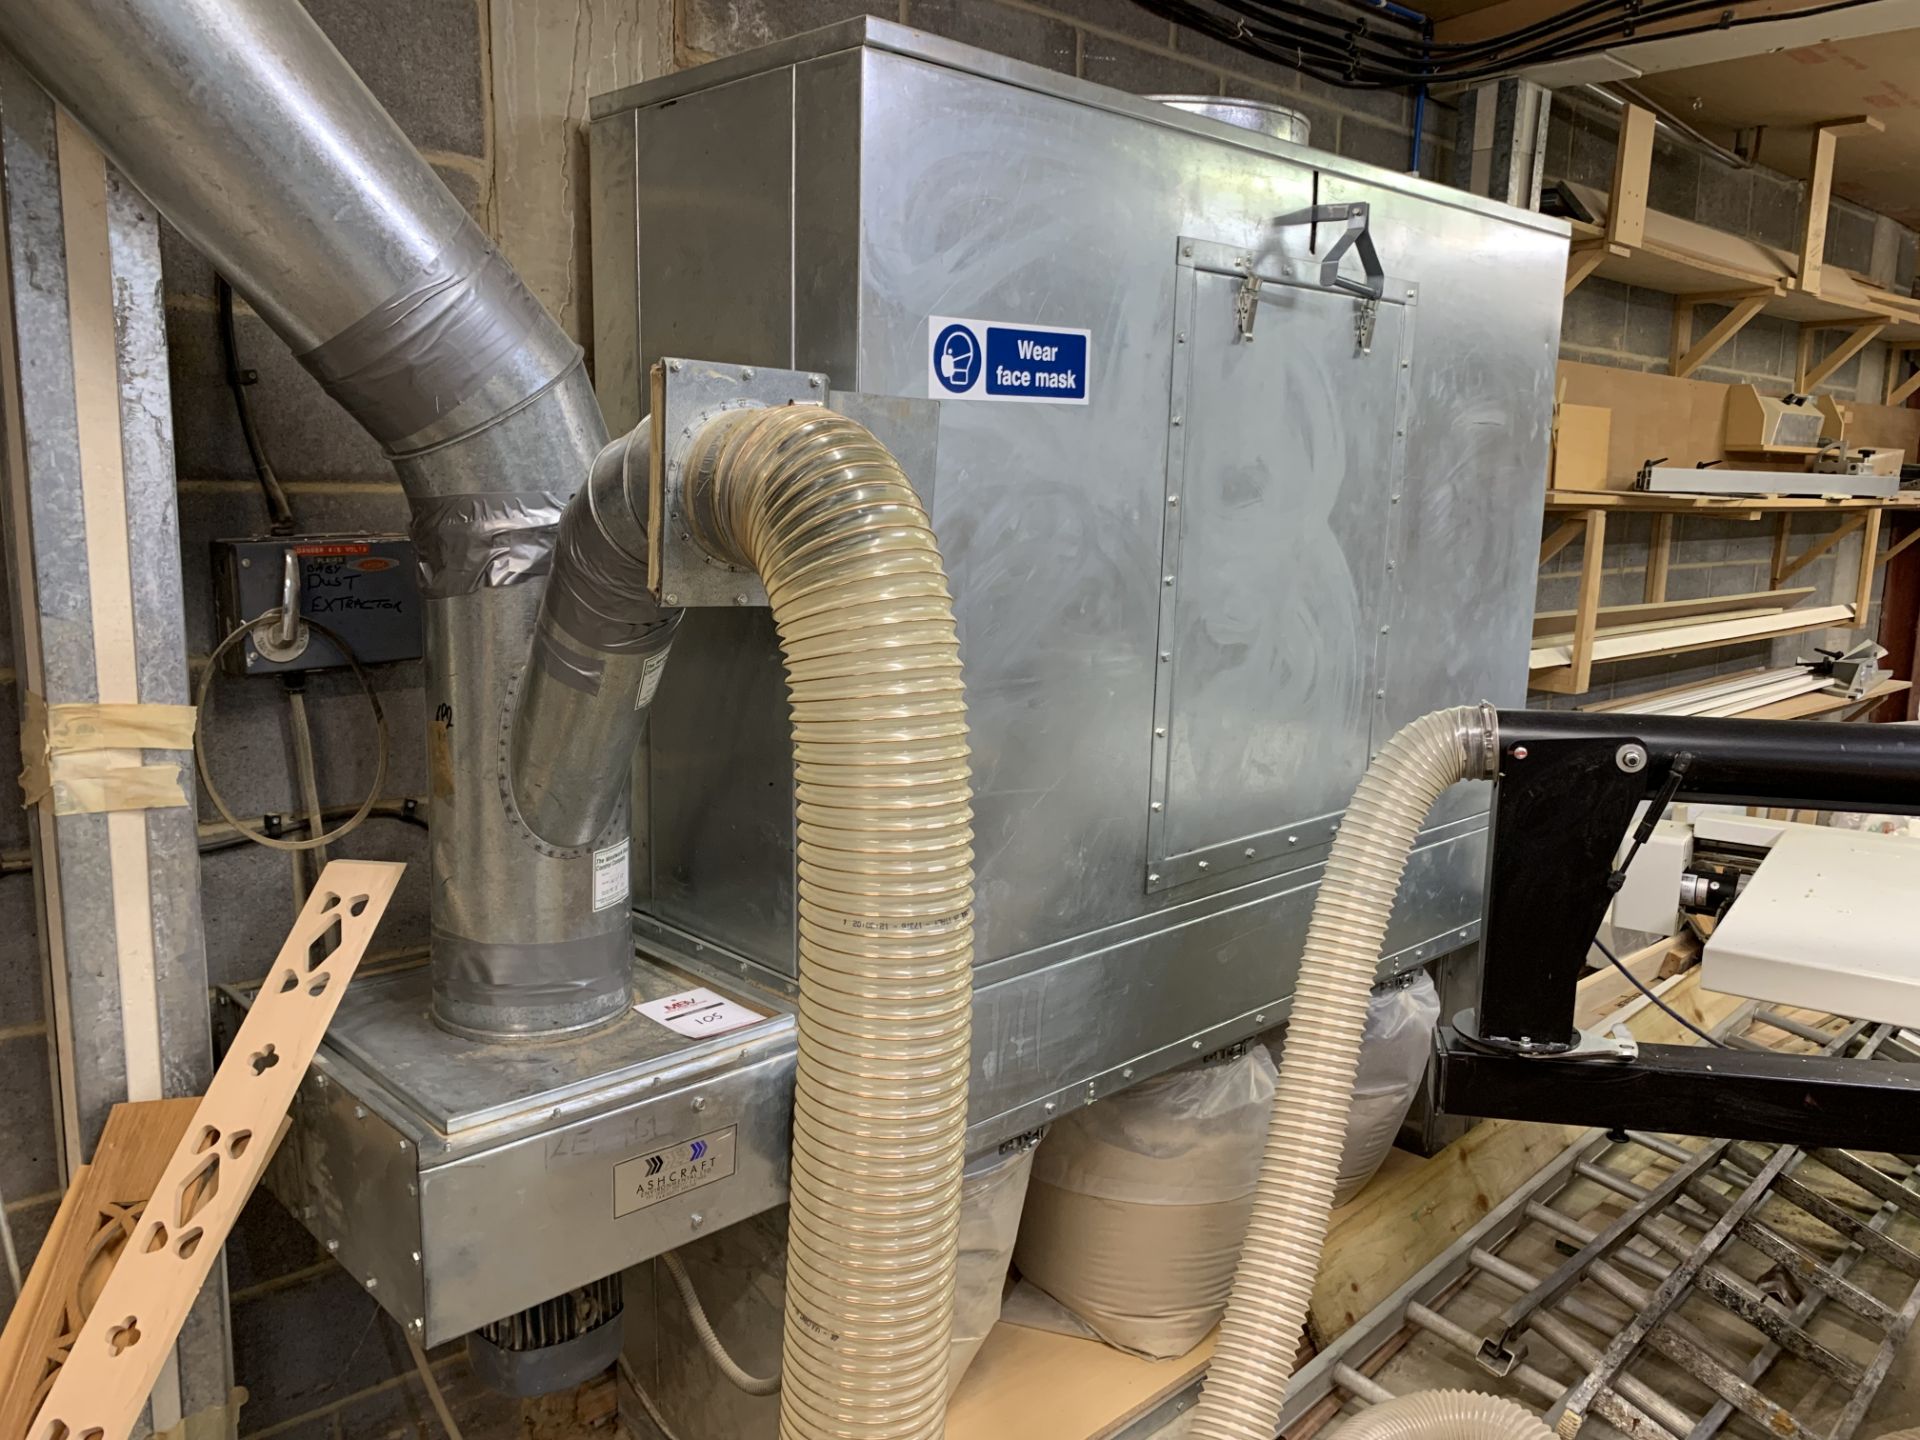 3 Bag Dust Extraction Unit and associated ducting